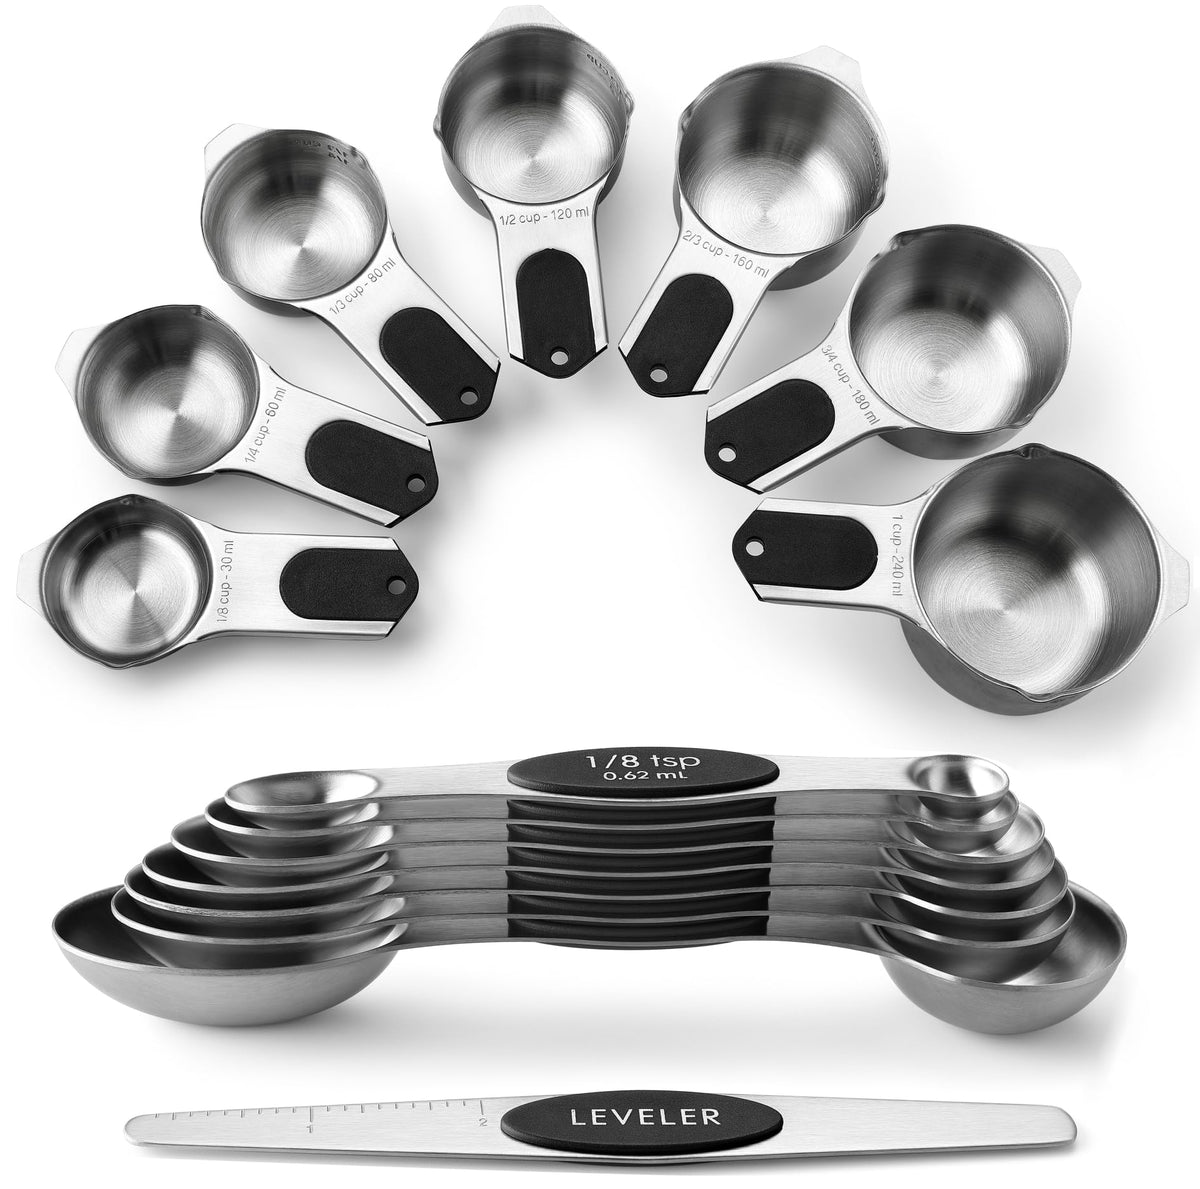 Spring Chef Magnetic Measuring Cups & Spoons Set (Patent Pending), Strong N45 Magnets, Heavy Duty Stainless Steel Fits in Spice Jars for Baking & Cooking, BPA Free, Round Set of 15 with Leveler, Black